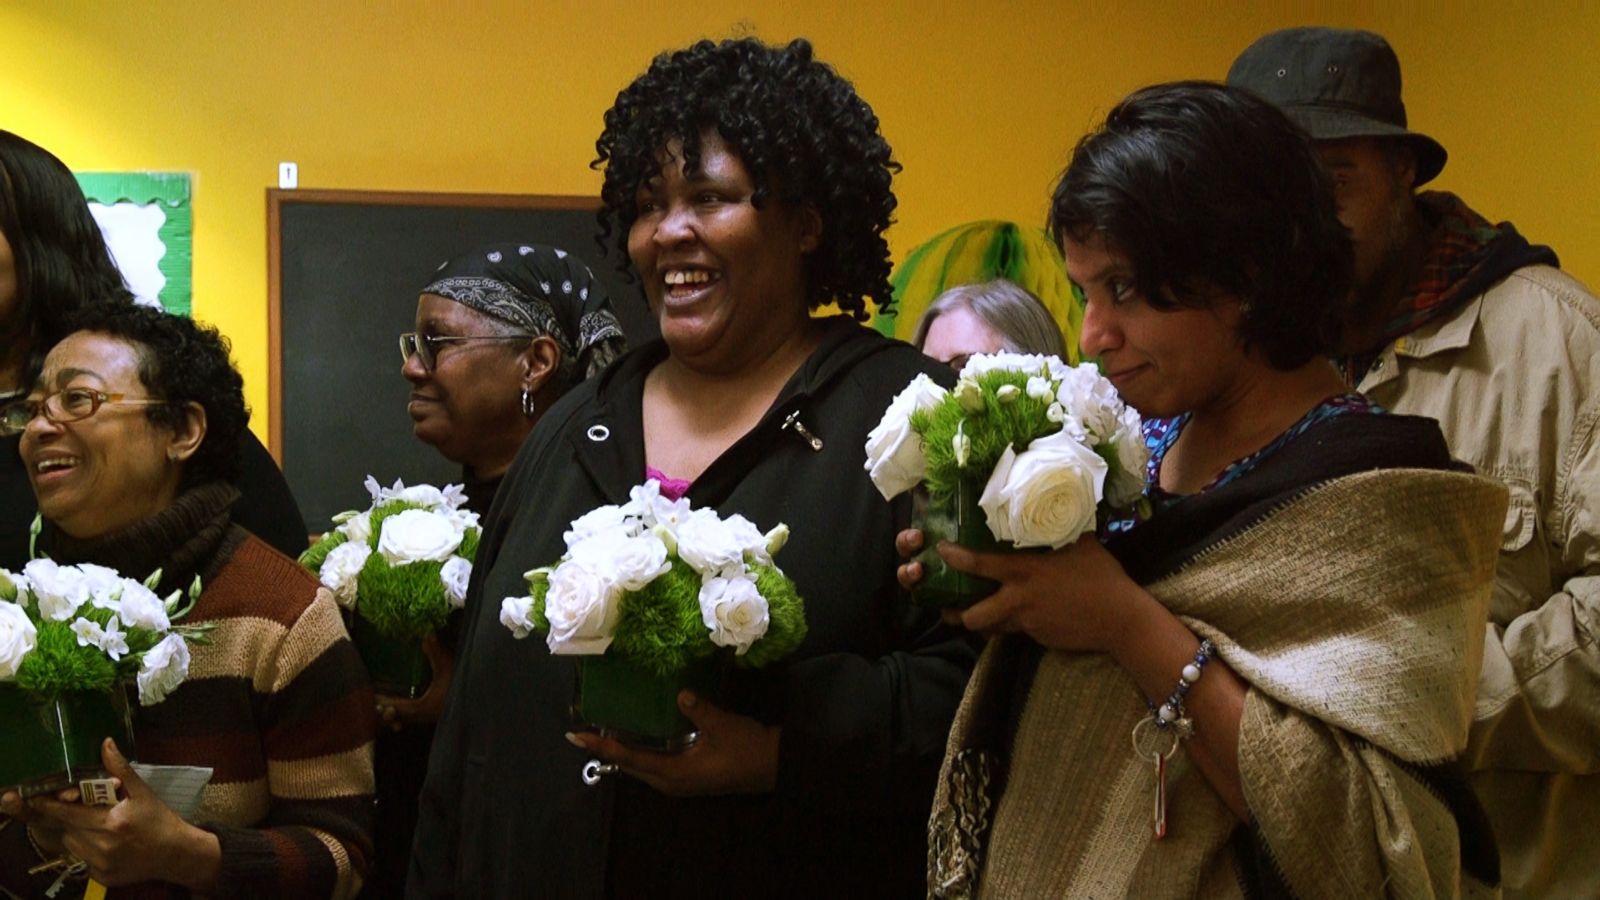 PHOTO: New York residents react after receiving flowers donated by Repeat Roses in March 2018.